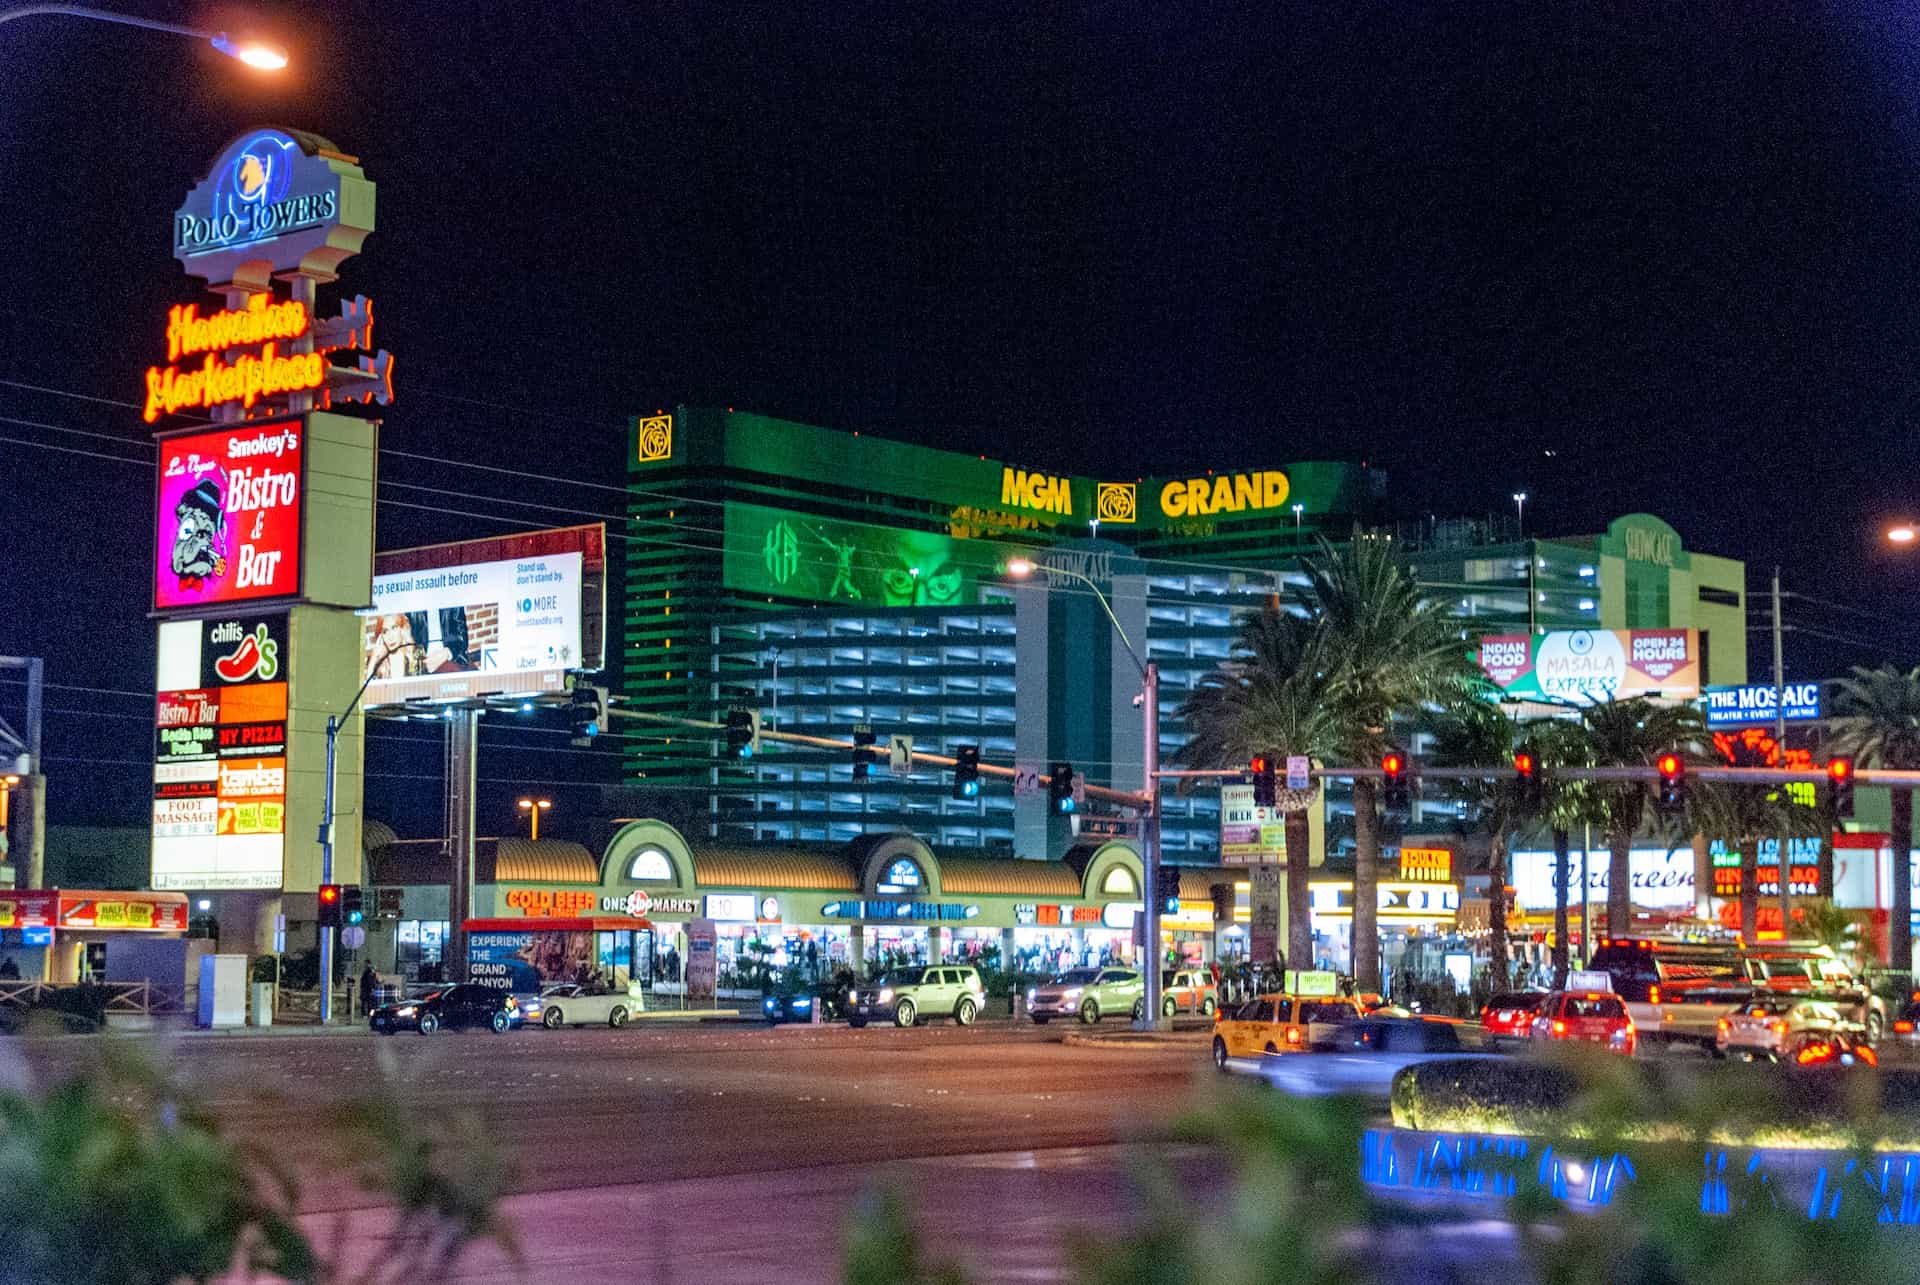 The MGM Grand casino and hotel complex in downtown Las Vegas, Nevada, with heavy traffic and bright neon lighting on the street outside.